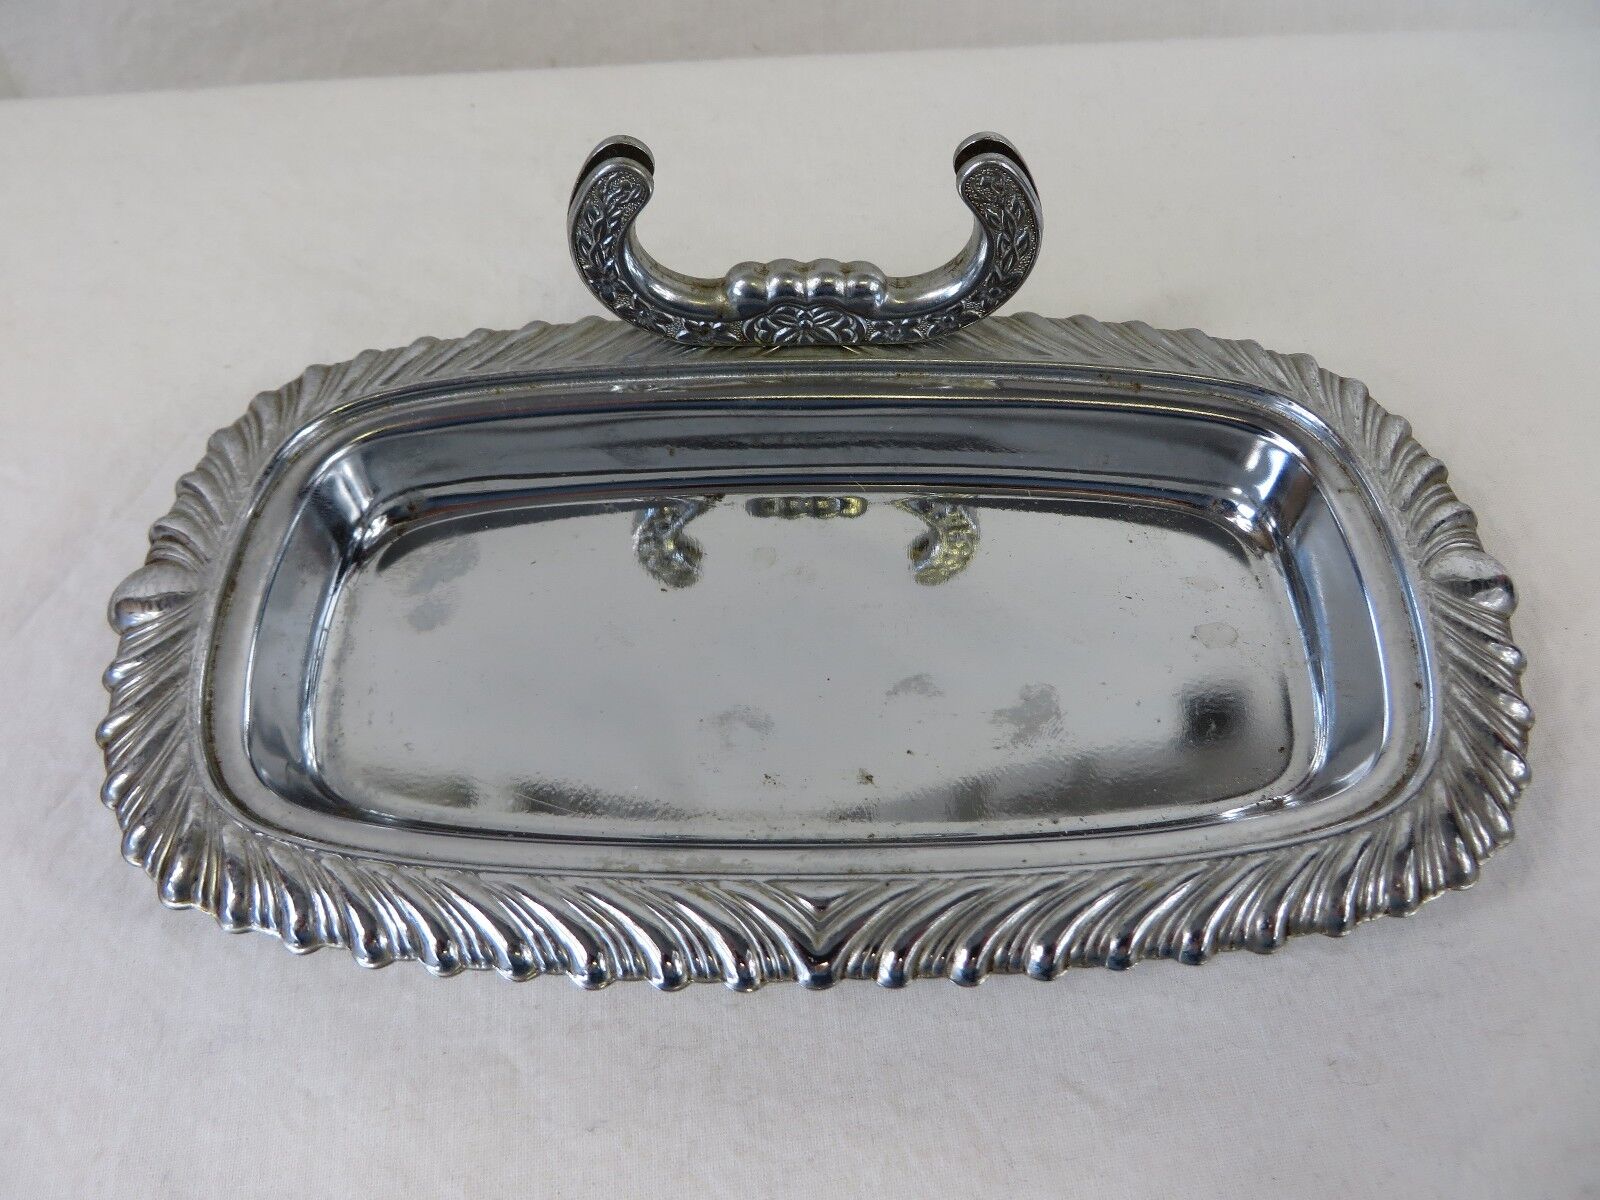 Vintage Irvinware Butter Tray Chrome Finish USA Tray Only #6671